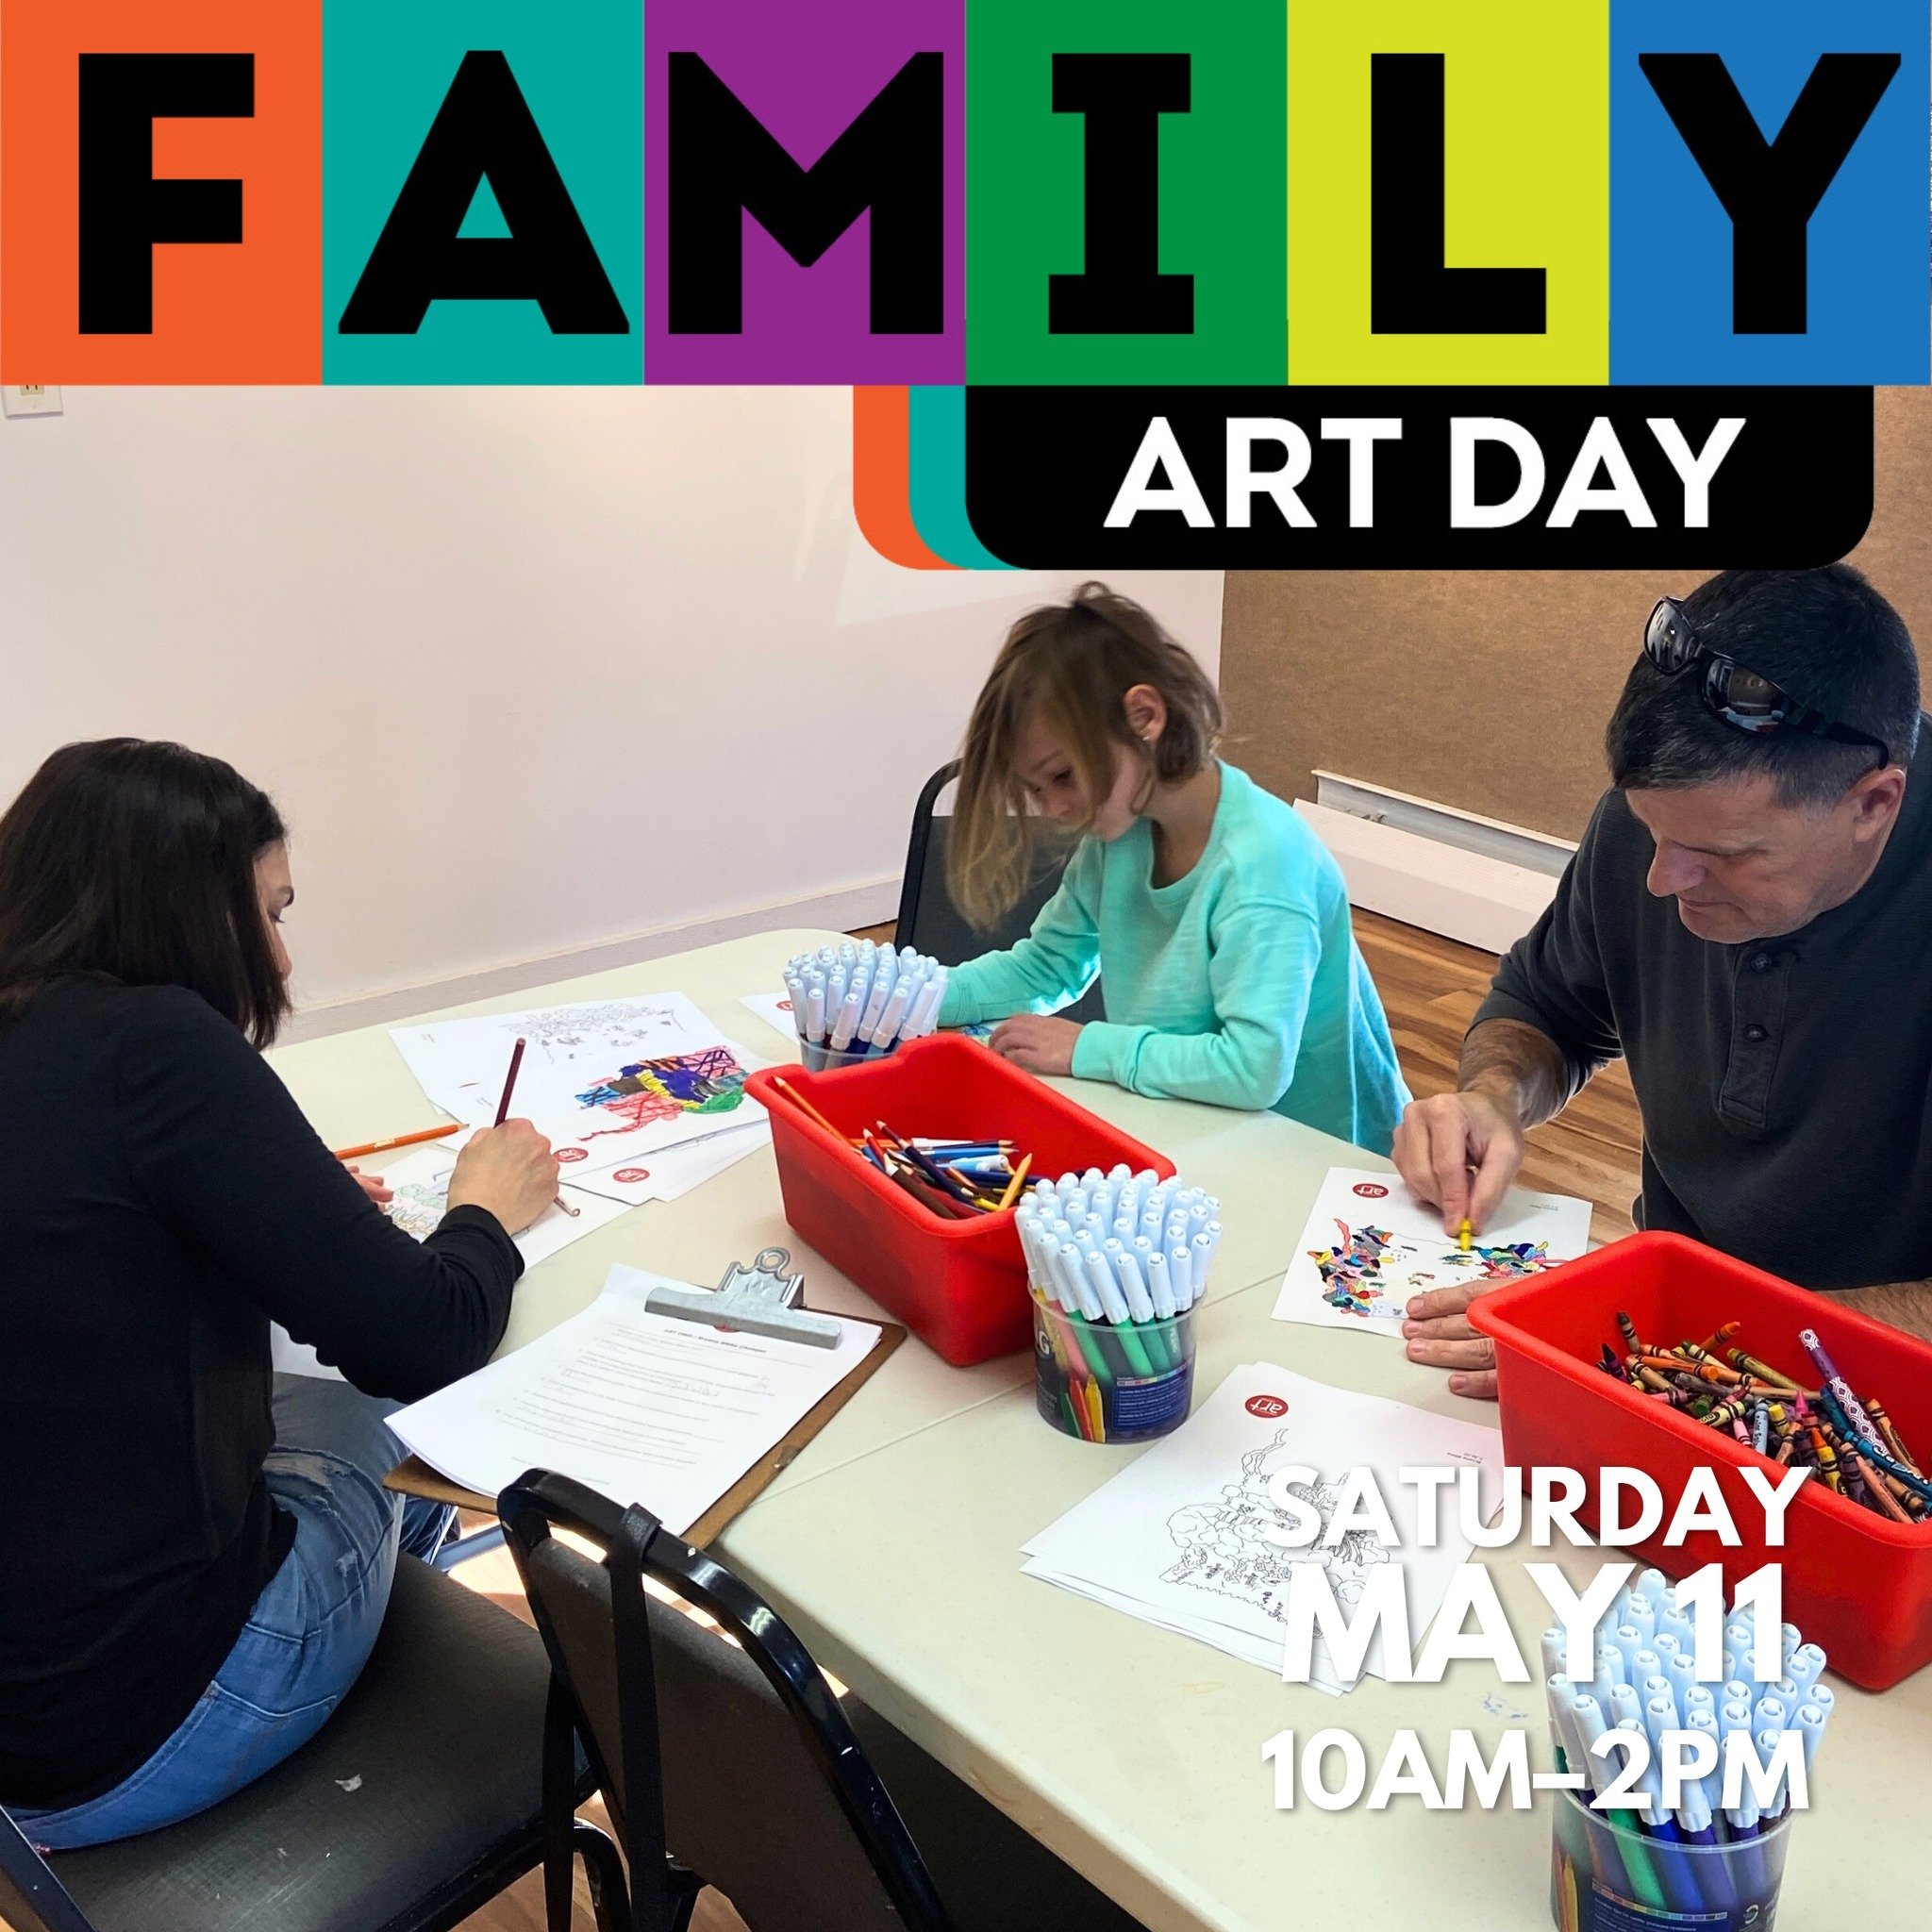 Chesterton Art Center's free Family Art Day is approaching! We welcome all to join on Saturday, May 11 for printmaking, collaging and more. Families can attend any time between 10 AM-2 PM.

With guidance from the CAC team, families will explore the w